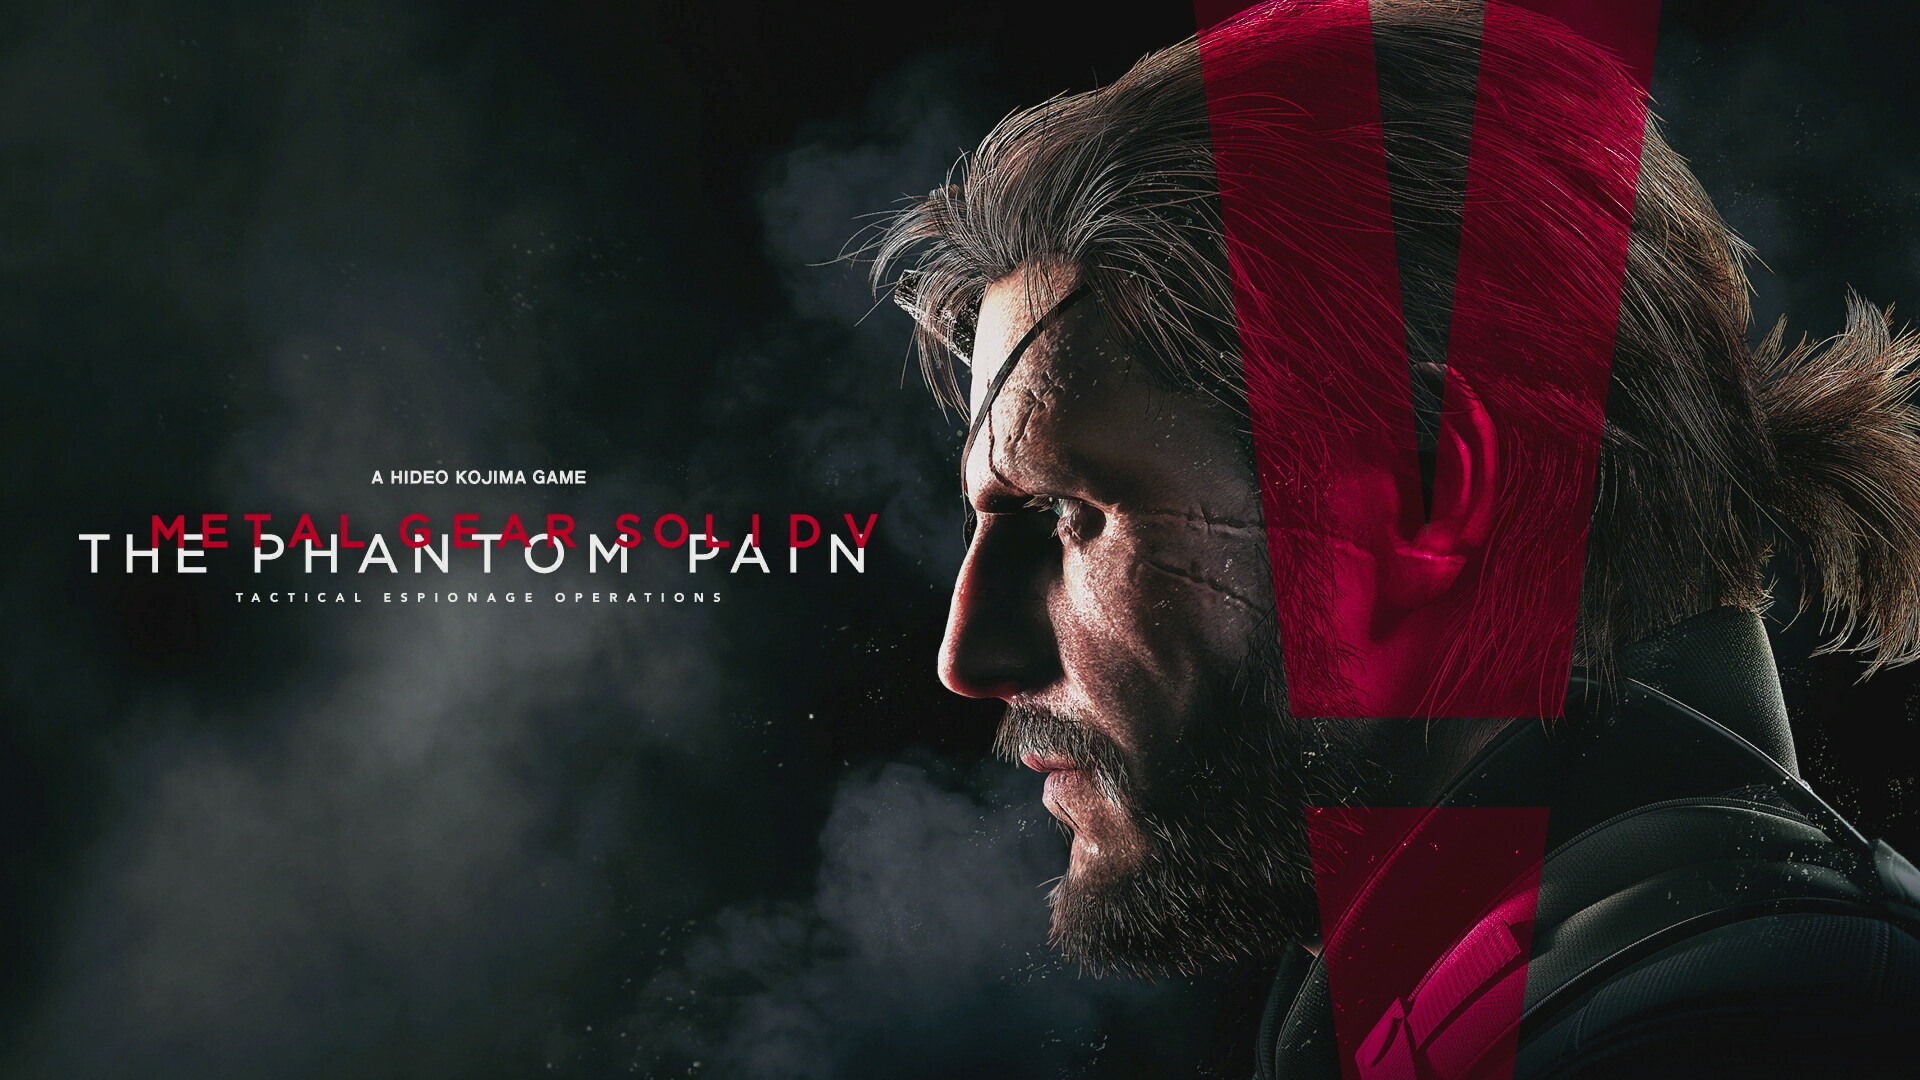 Mgs V The Phantom Pain Nuclear Disarmament Event Deemed Impossible By Fans Mxdwn Games